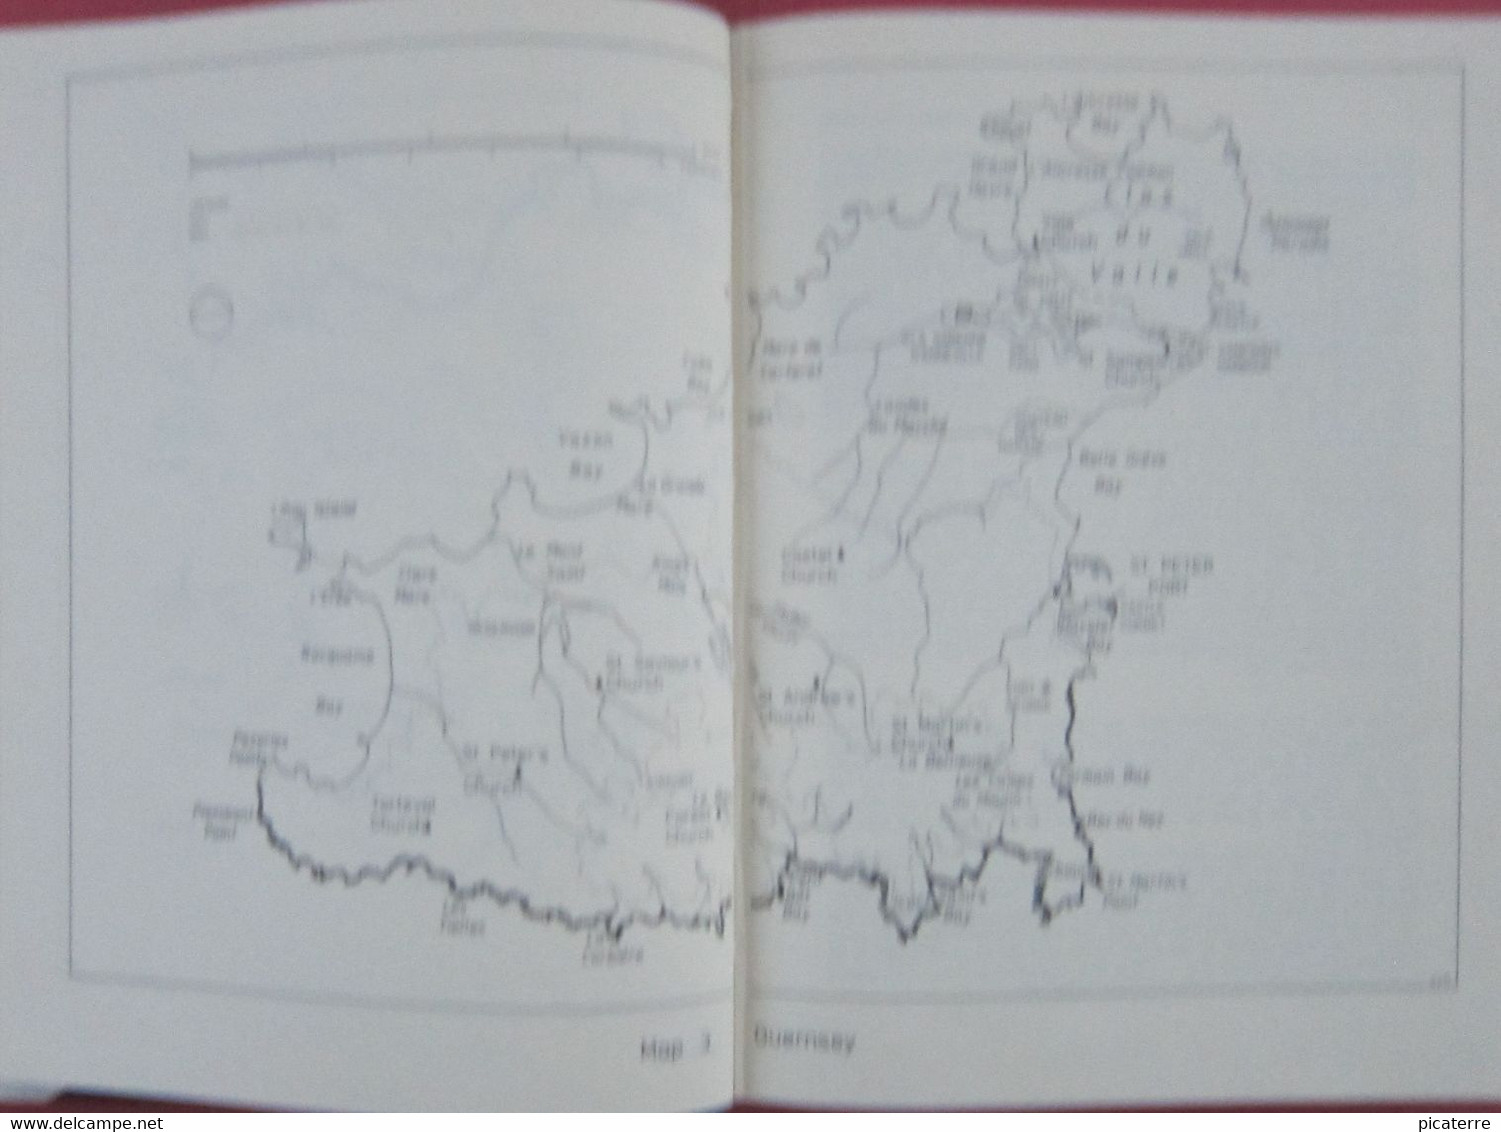 POST FREE UK-Landscape of the Channel Islands- Nigel Jee- 1982 h/back, d/jacket, 98 pages-5maps/64 photos-see 11 scans